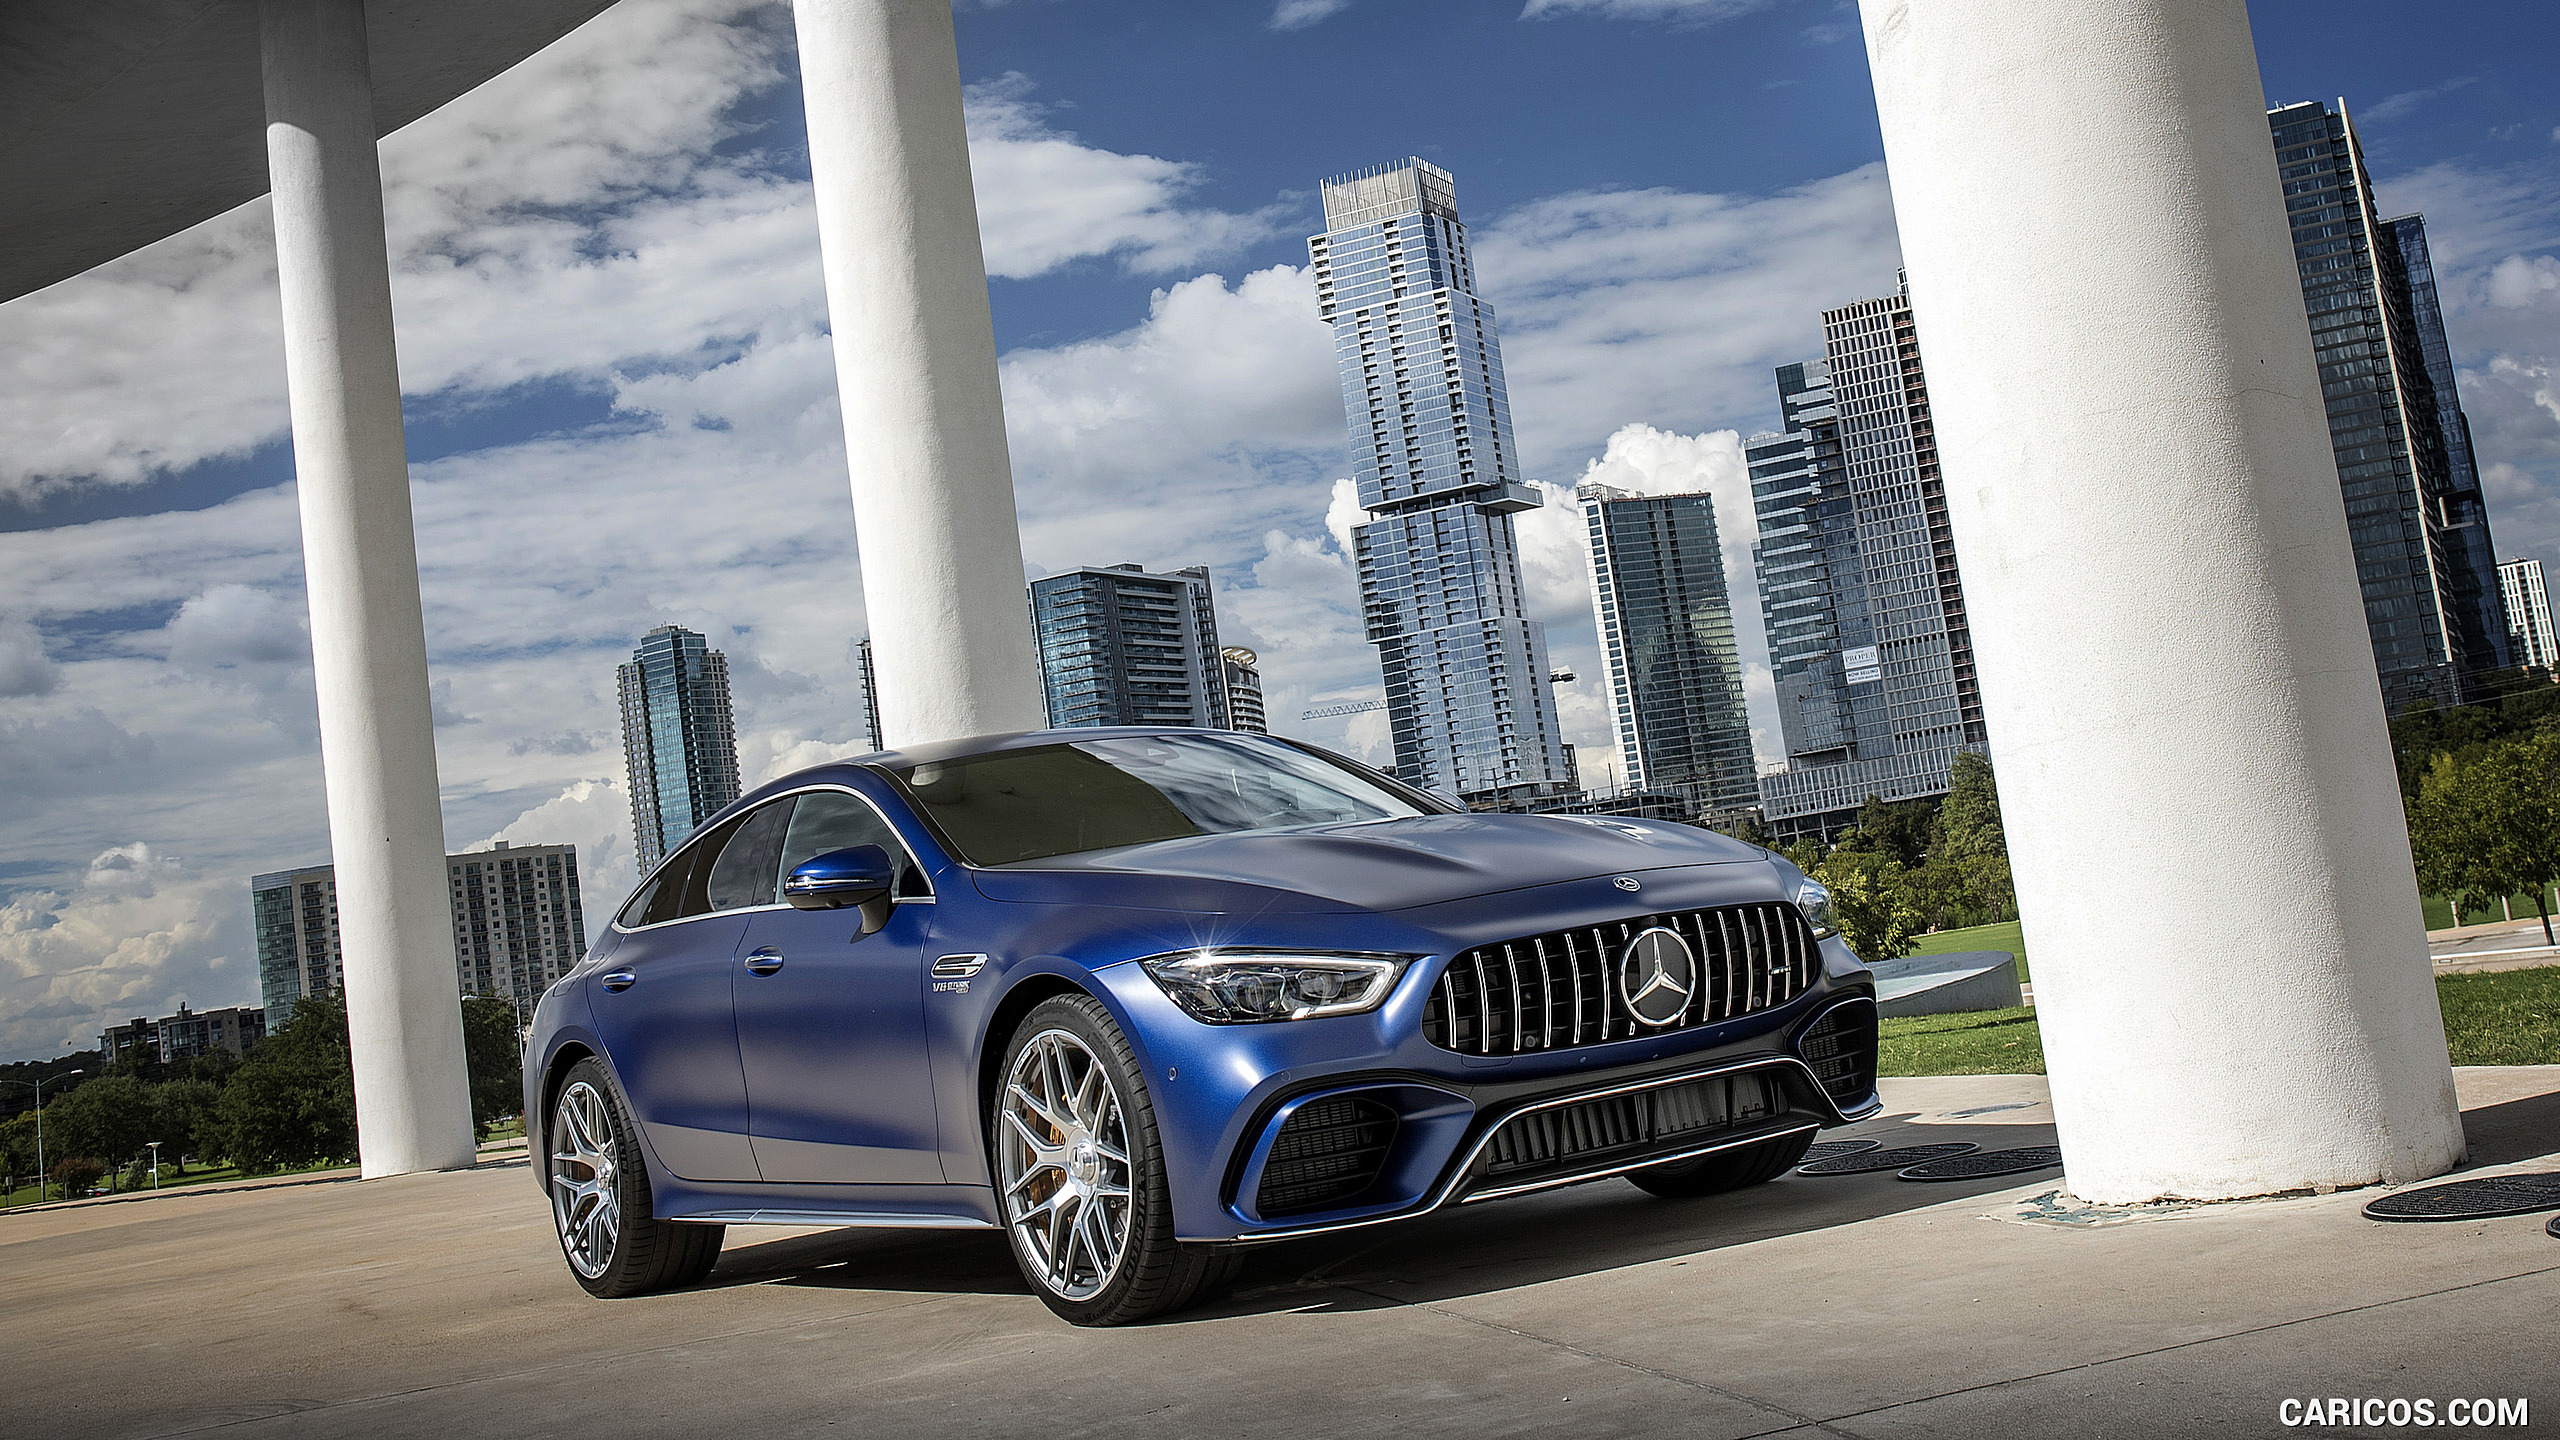 2019 Mercedes-AMG GT 63 S 4MATIC+ 4-Door Coupe - Front Three-Quarter, #129 of 427